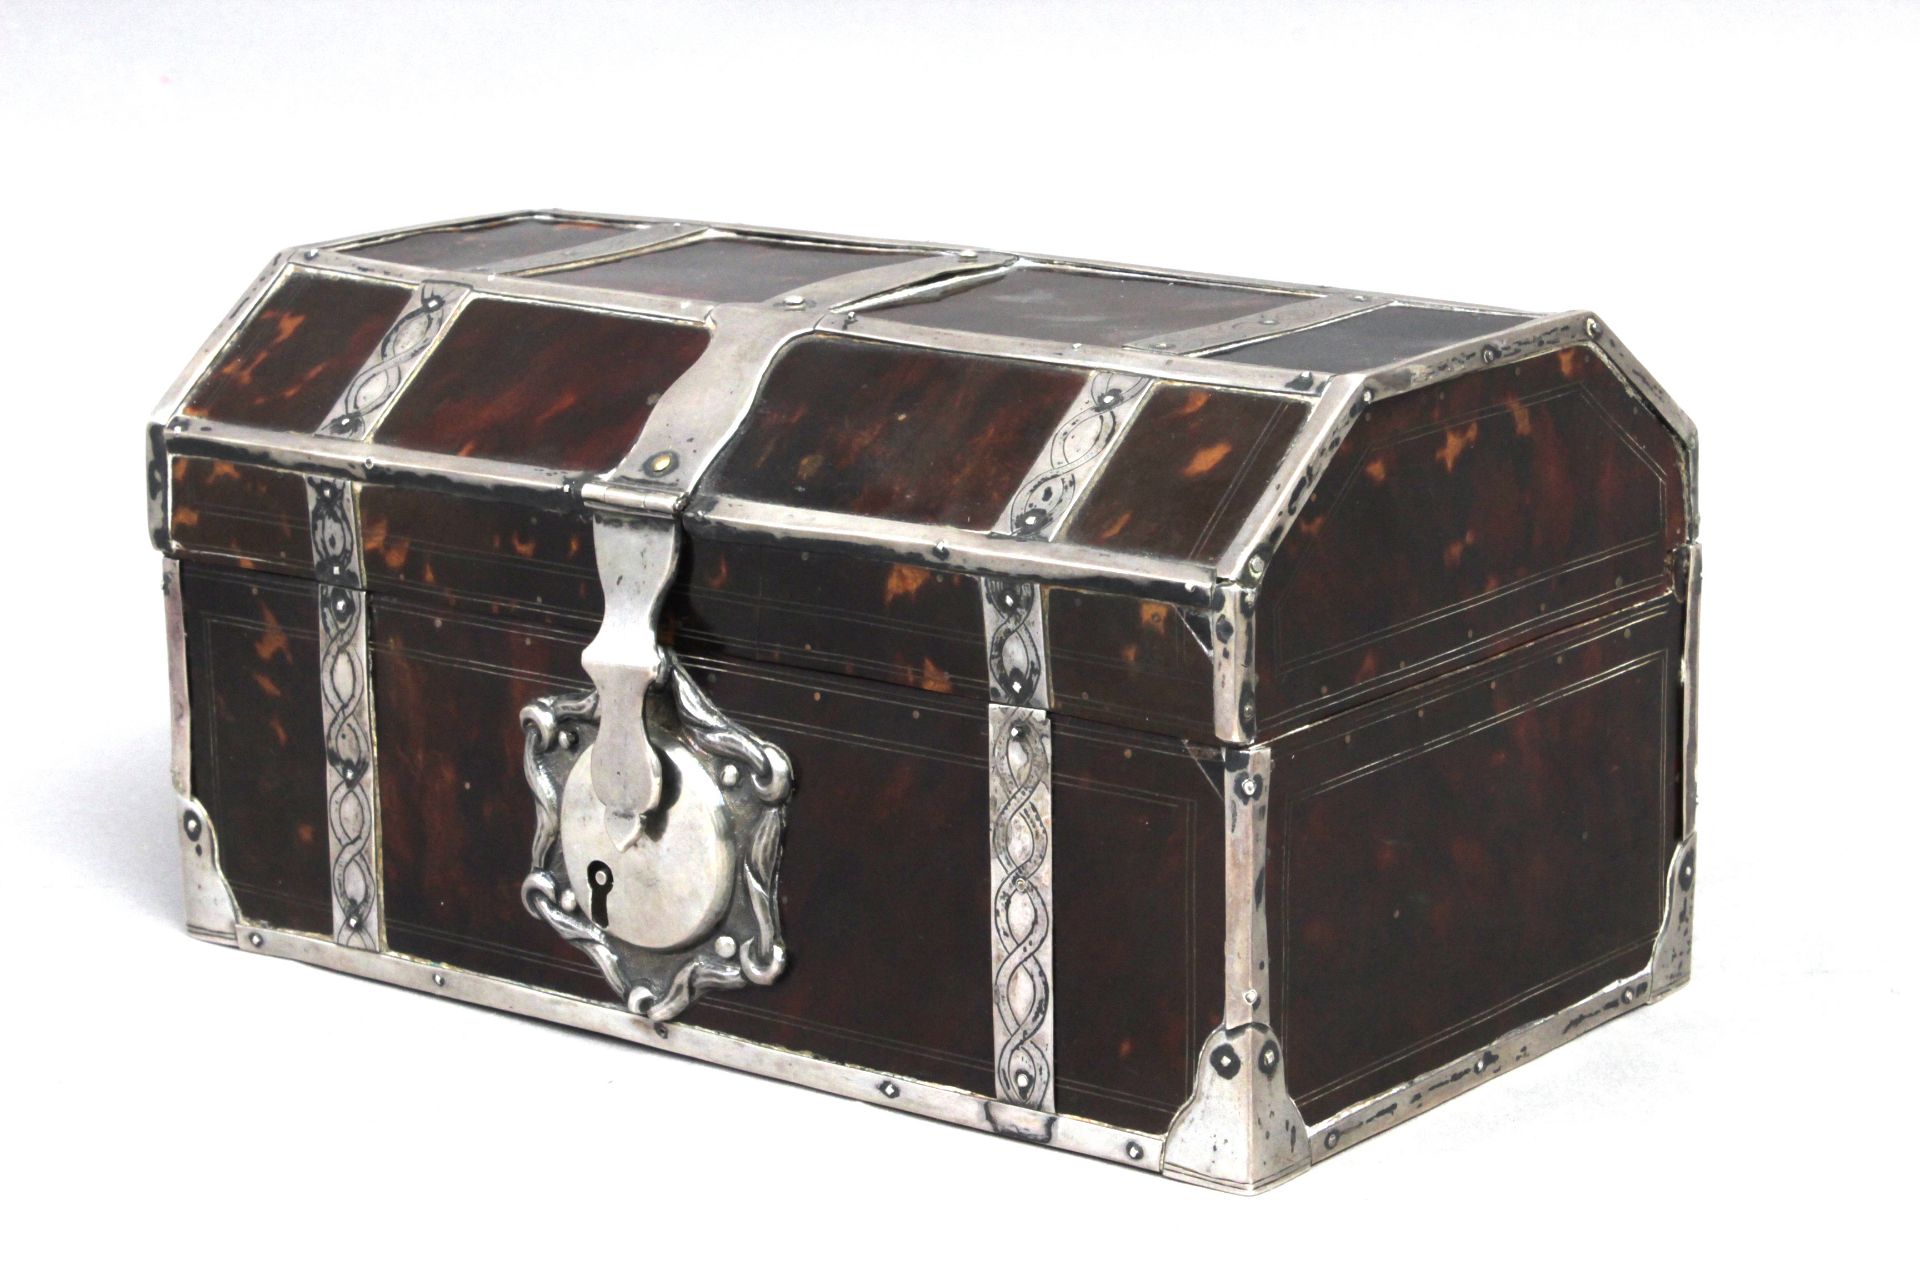 A 17th century Colonial silver and tortoiseshell chest